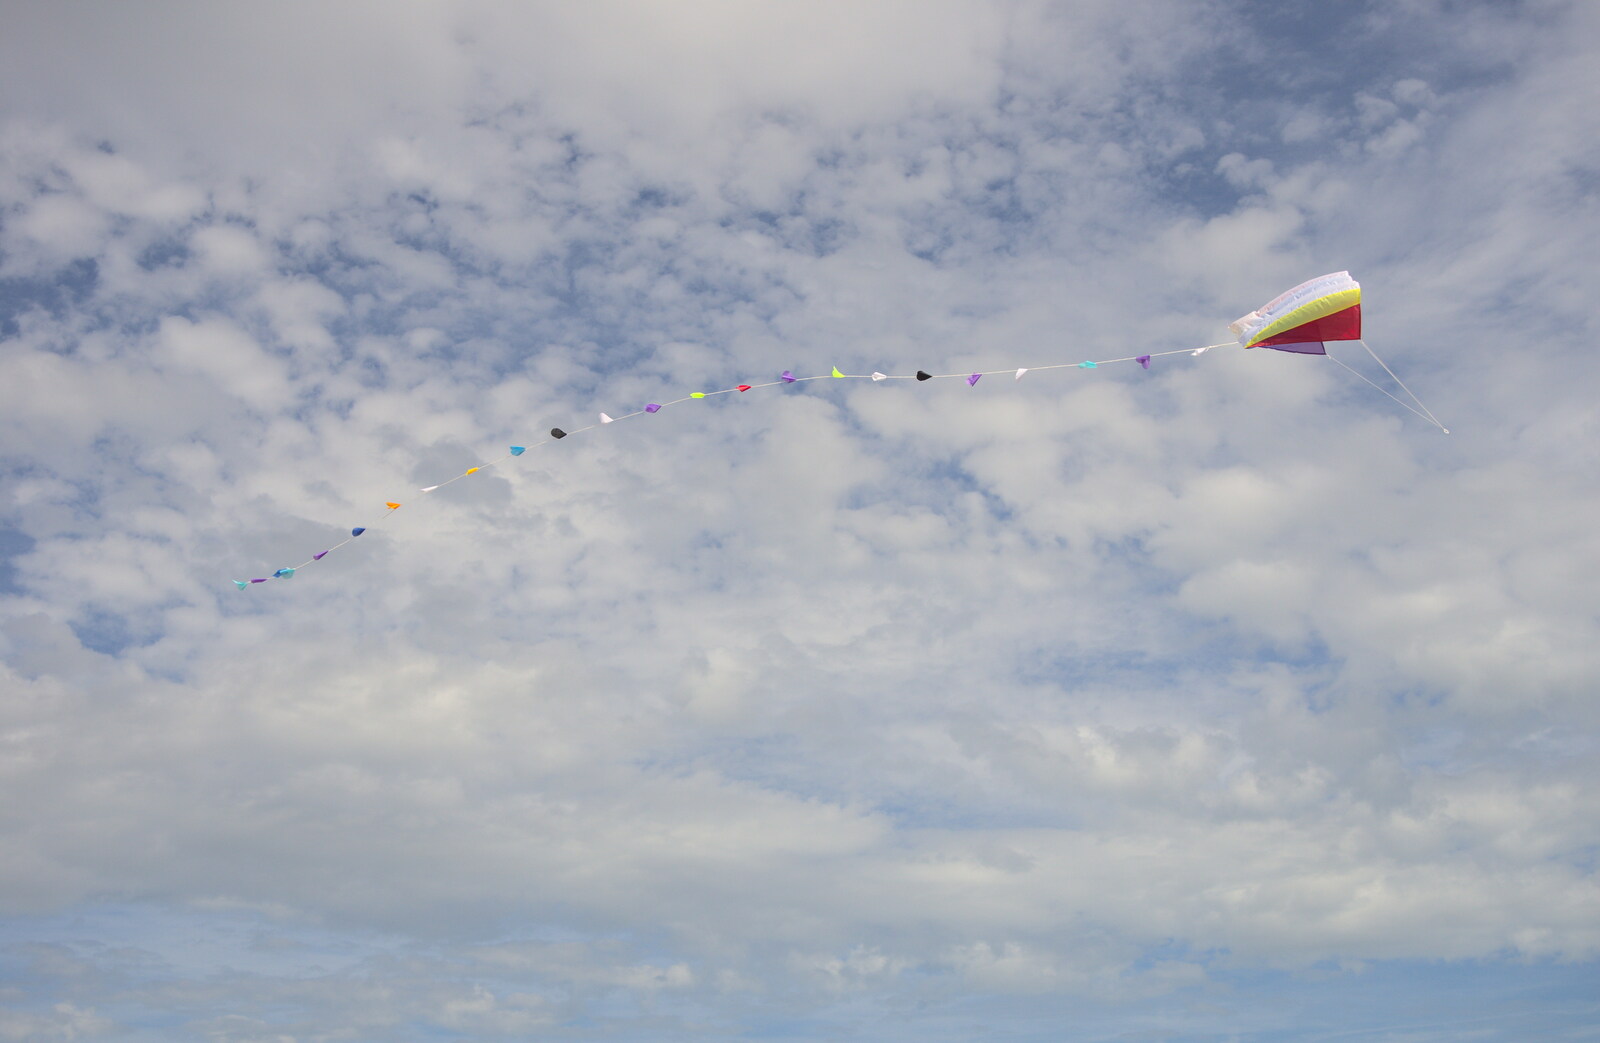 A kite flies around in the strong breeze from Camping by the Seaside, Cliff House, Dunwich, Suffolk - 15th August 2012